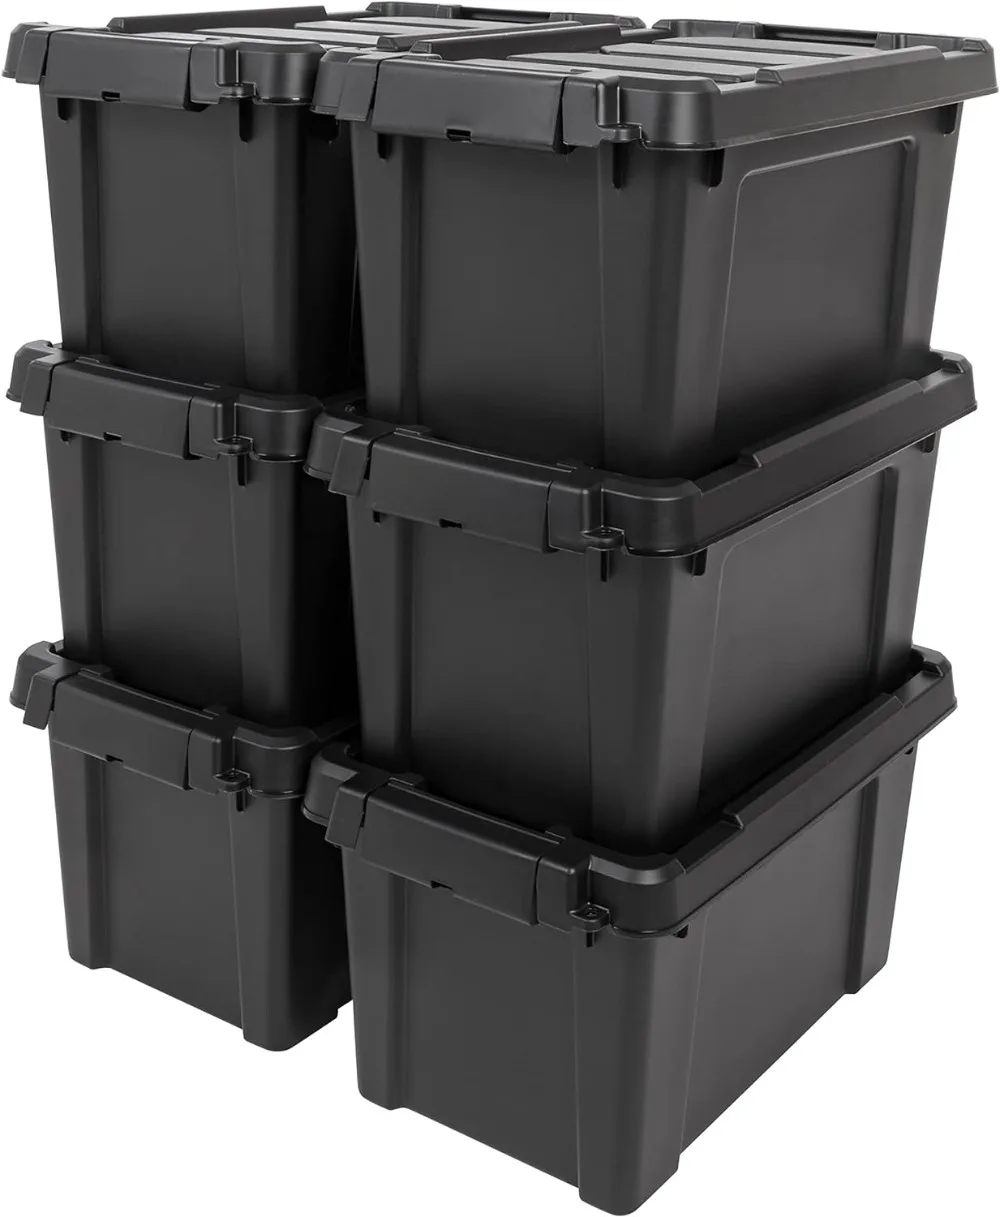 

IRIS USA 5 Gallon Lockable Storage Totes with Lids, 6 Pack - Black, Heavy-Duty Durable Stackable Containers, Large Garage